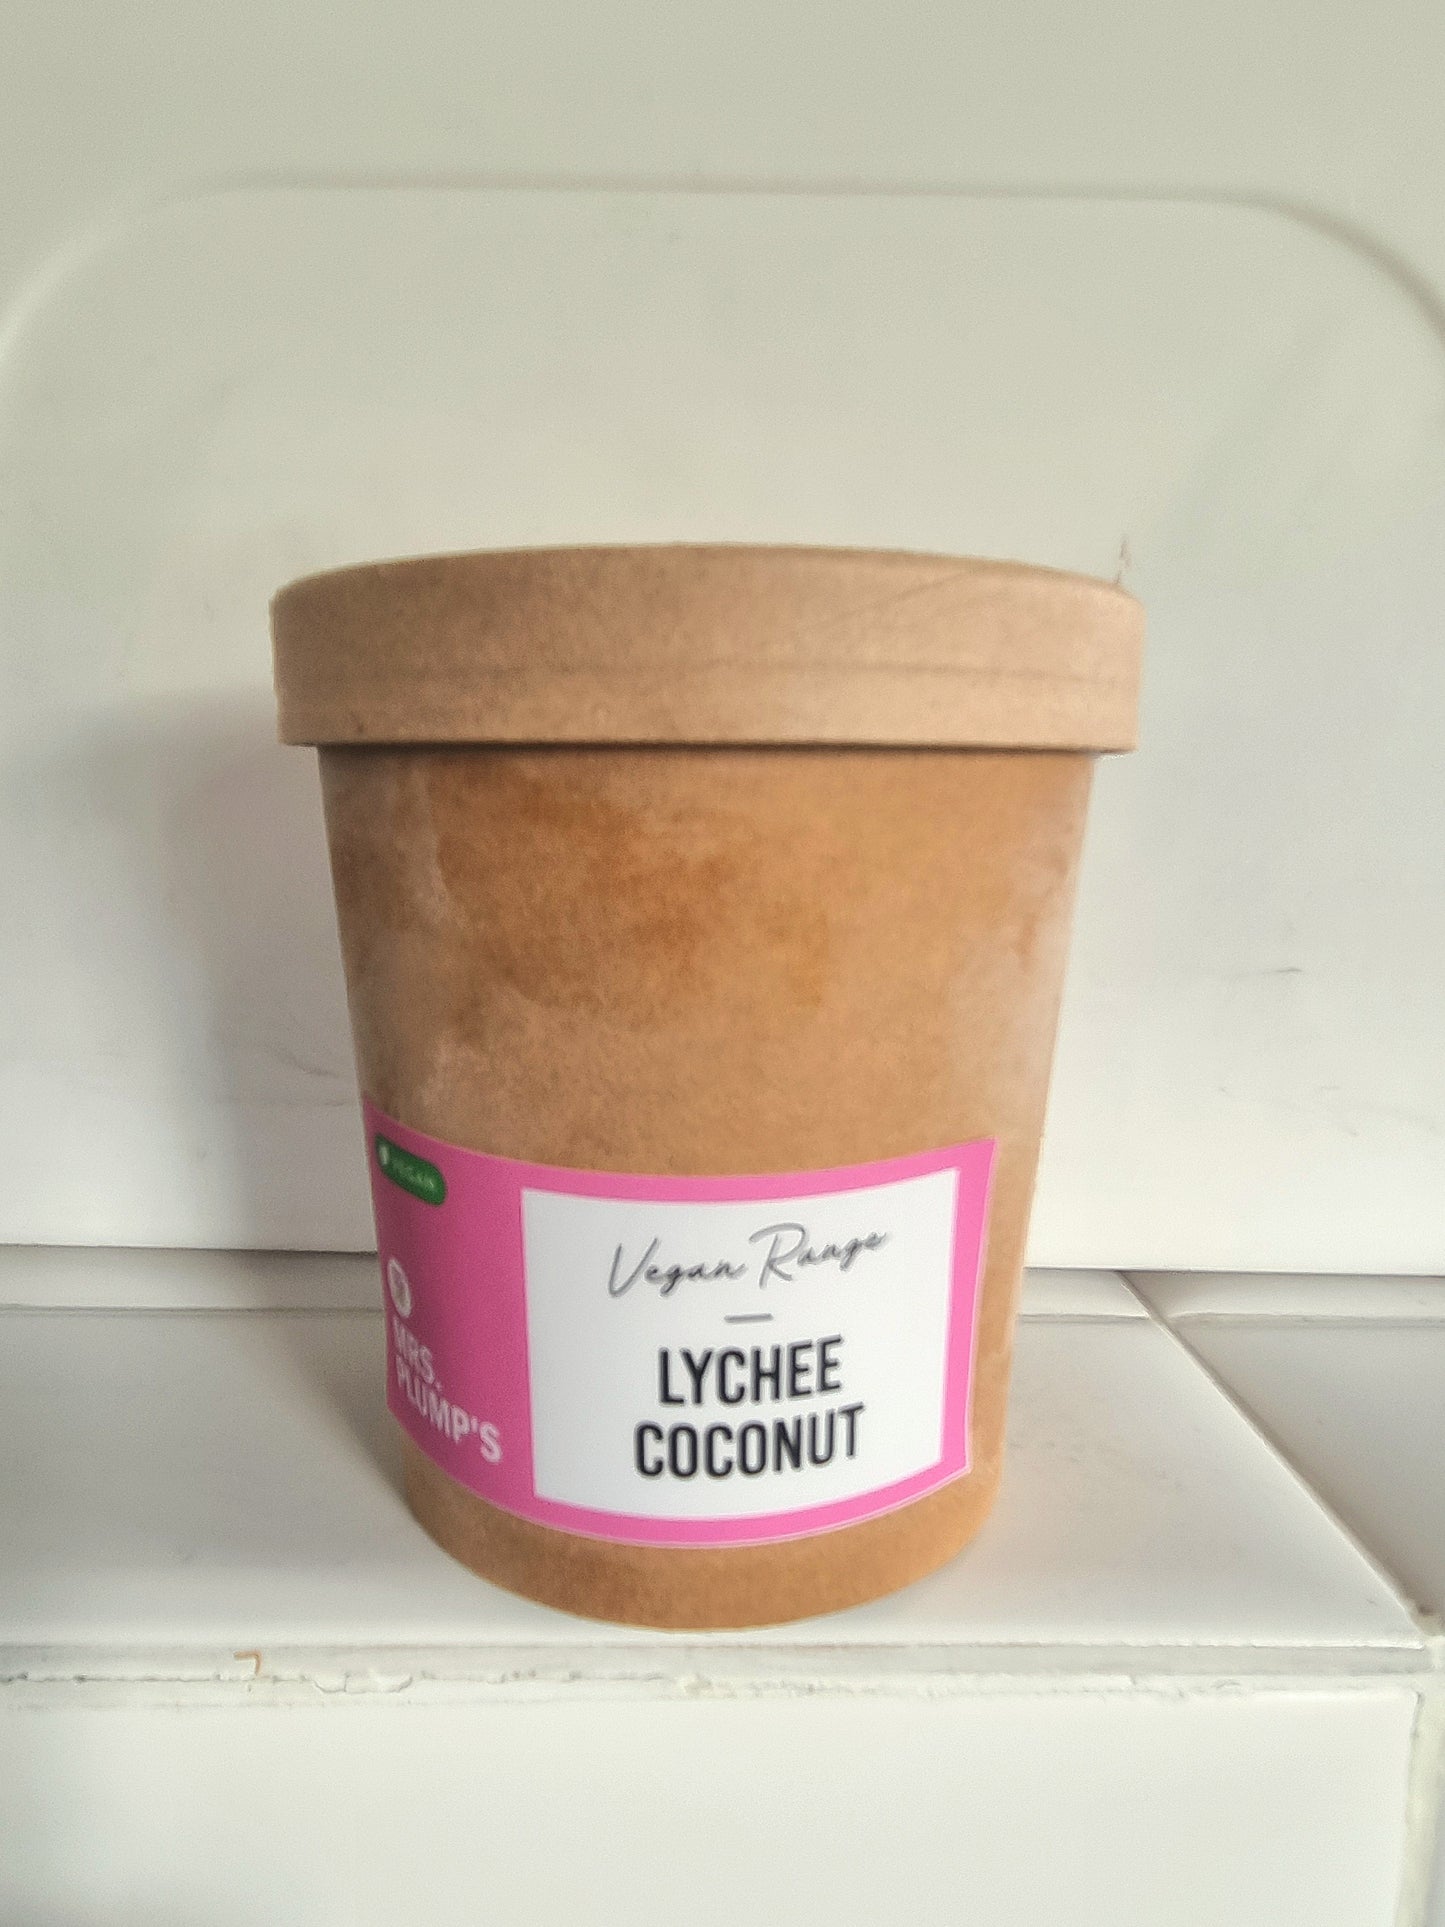 Lychee Coconut